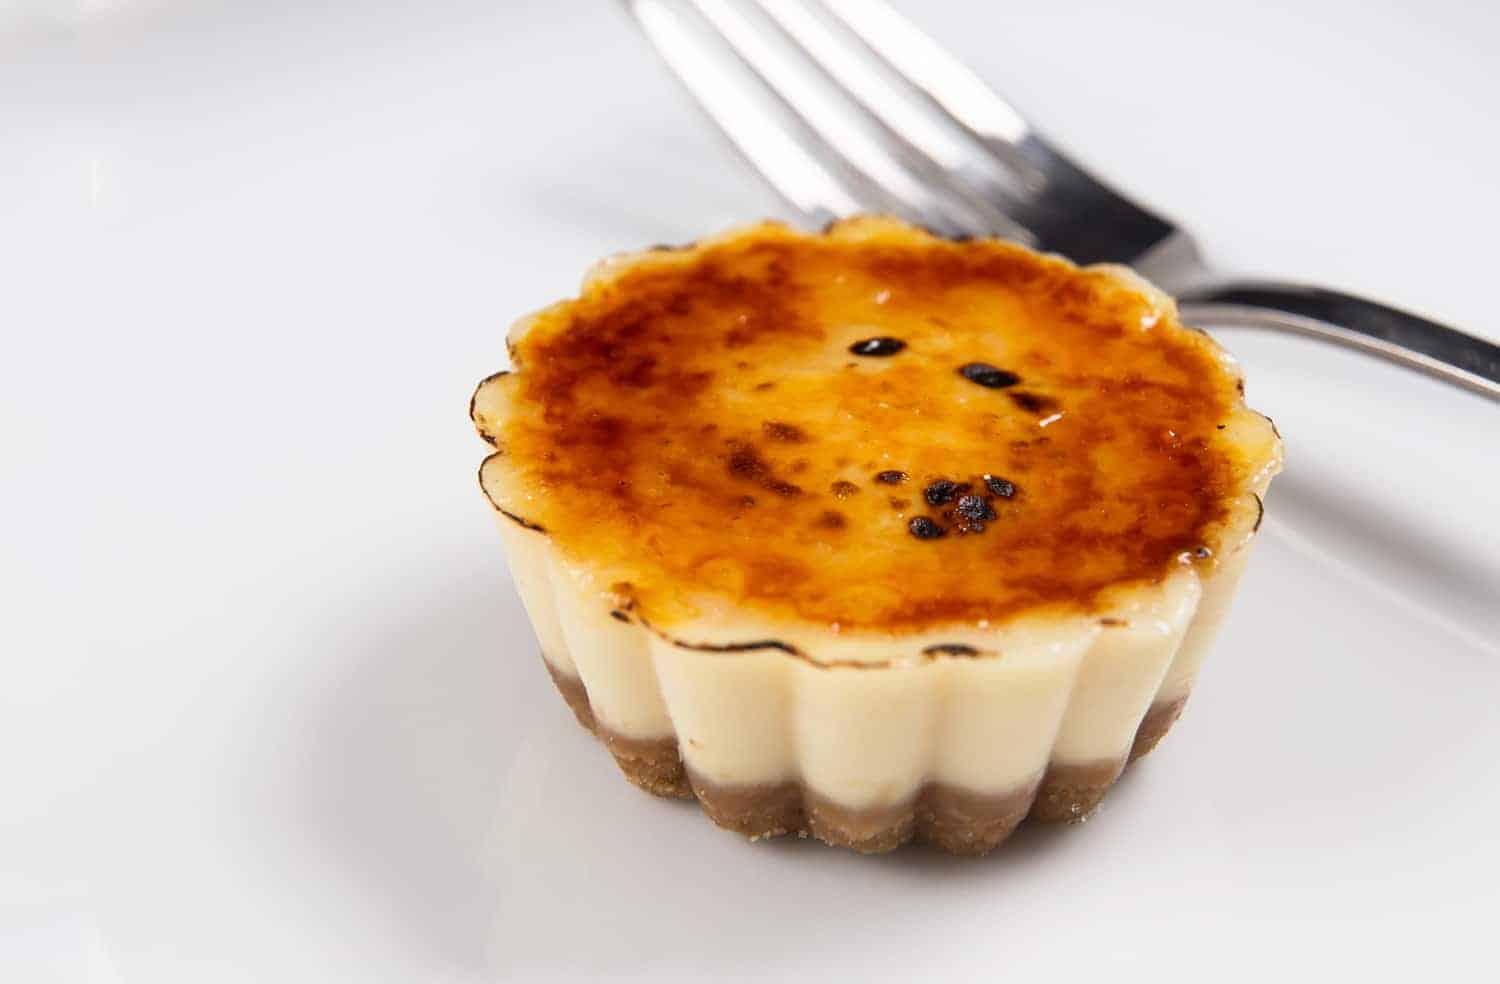 Instant Pot Cheesecake Creme Brulee Bites Recipe: Make these crowd-pleasing pressure cooker cheesecake bites. A luxuriously rich & dense cheesecake, matched with crisp buttery crust and crackable sweet caramel. Impress your guests with this taste of heaven in one bite!